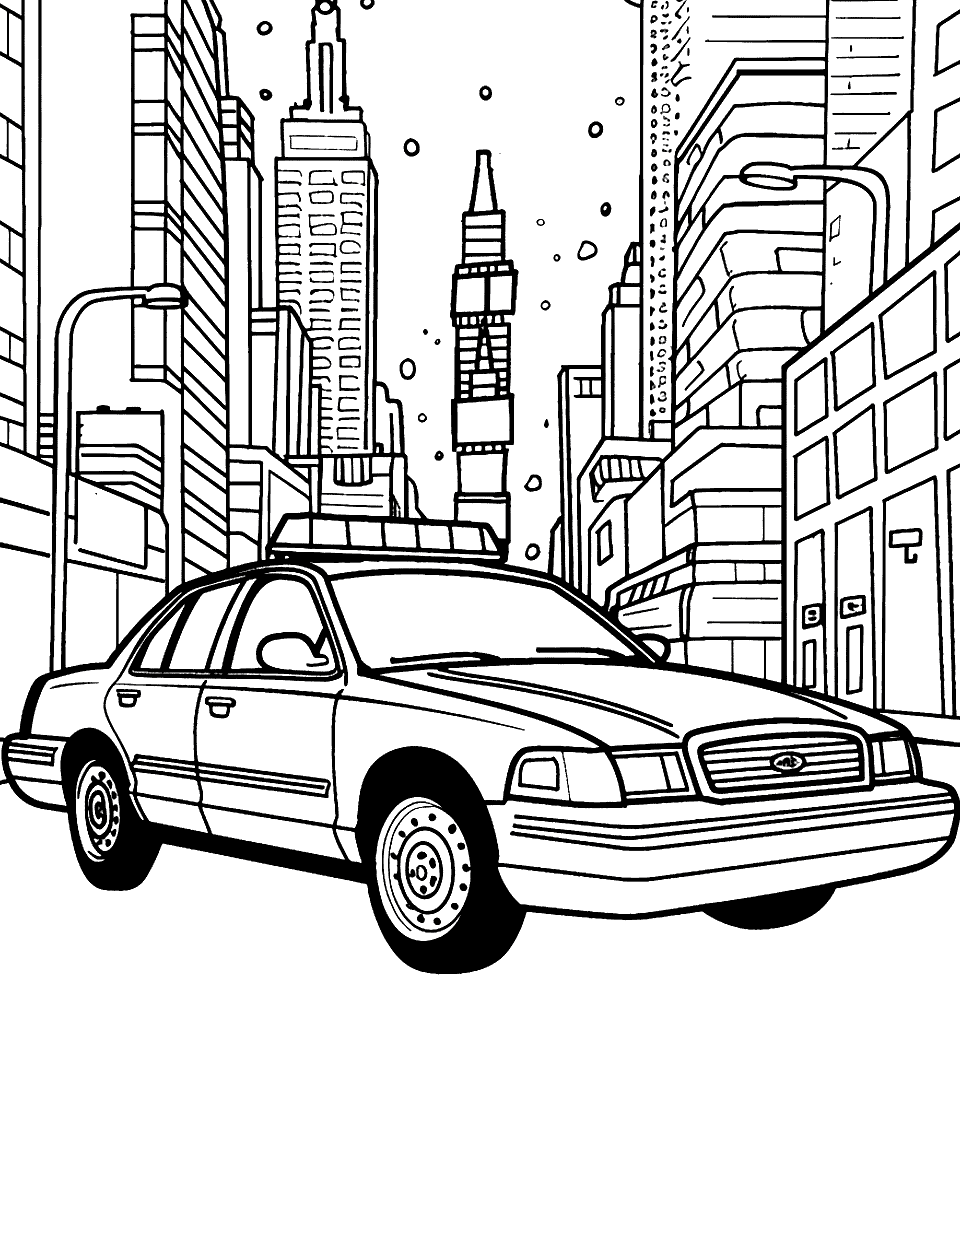 Police Patrol Car Coloring Page - A police car driving through a city on its patrol route for routine runs.